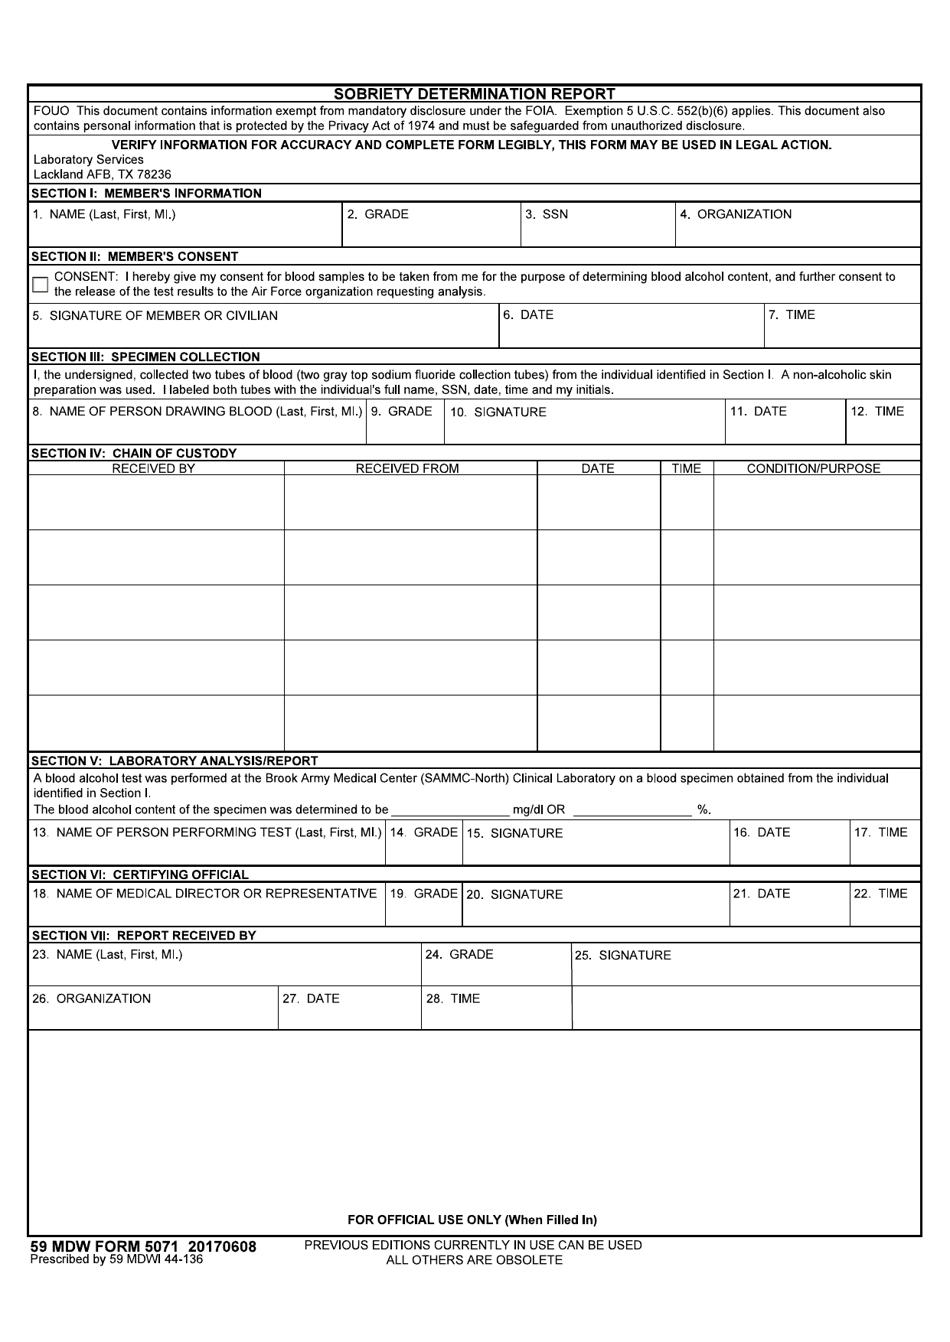 59 MDW Form 5071 Sobriety Determination Report, Page 1